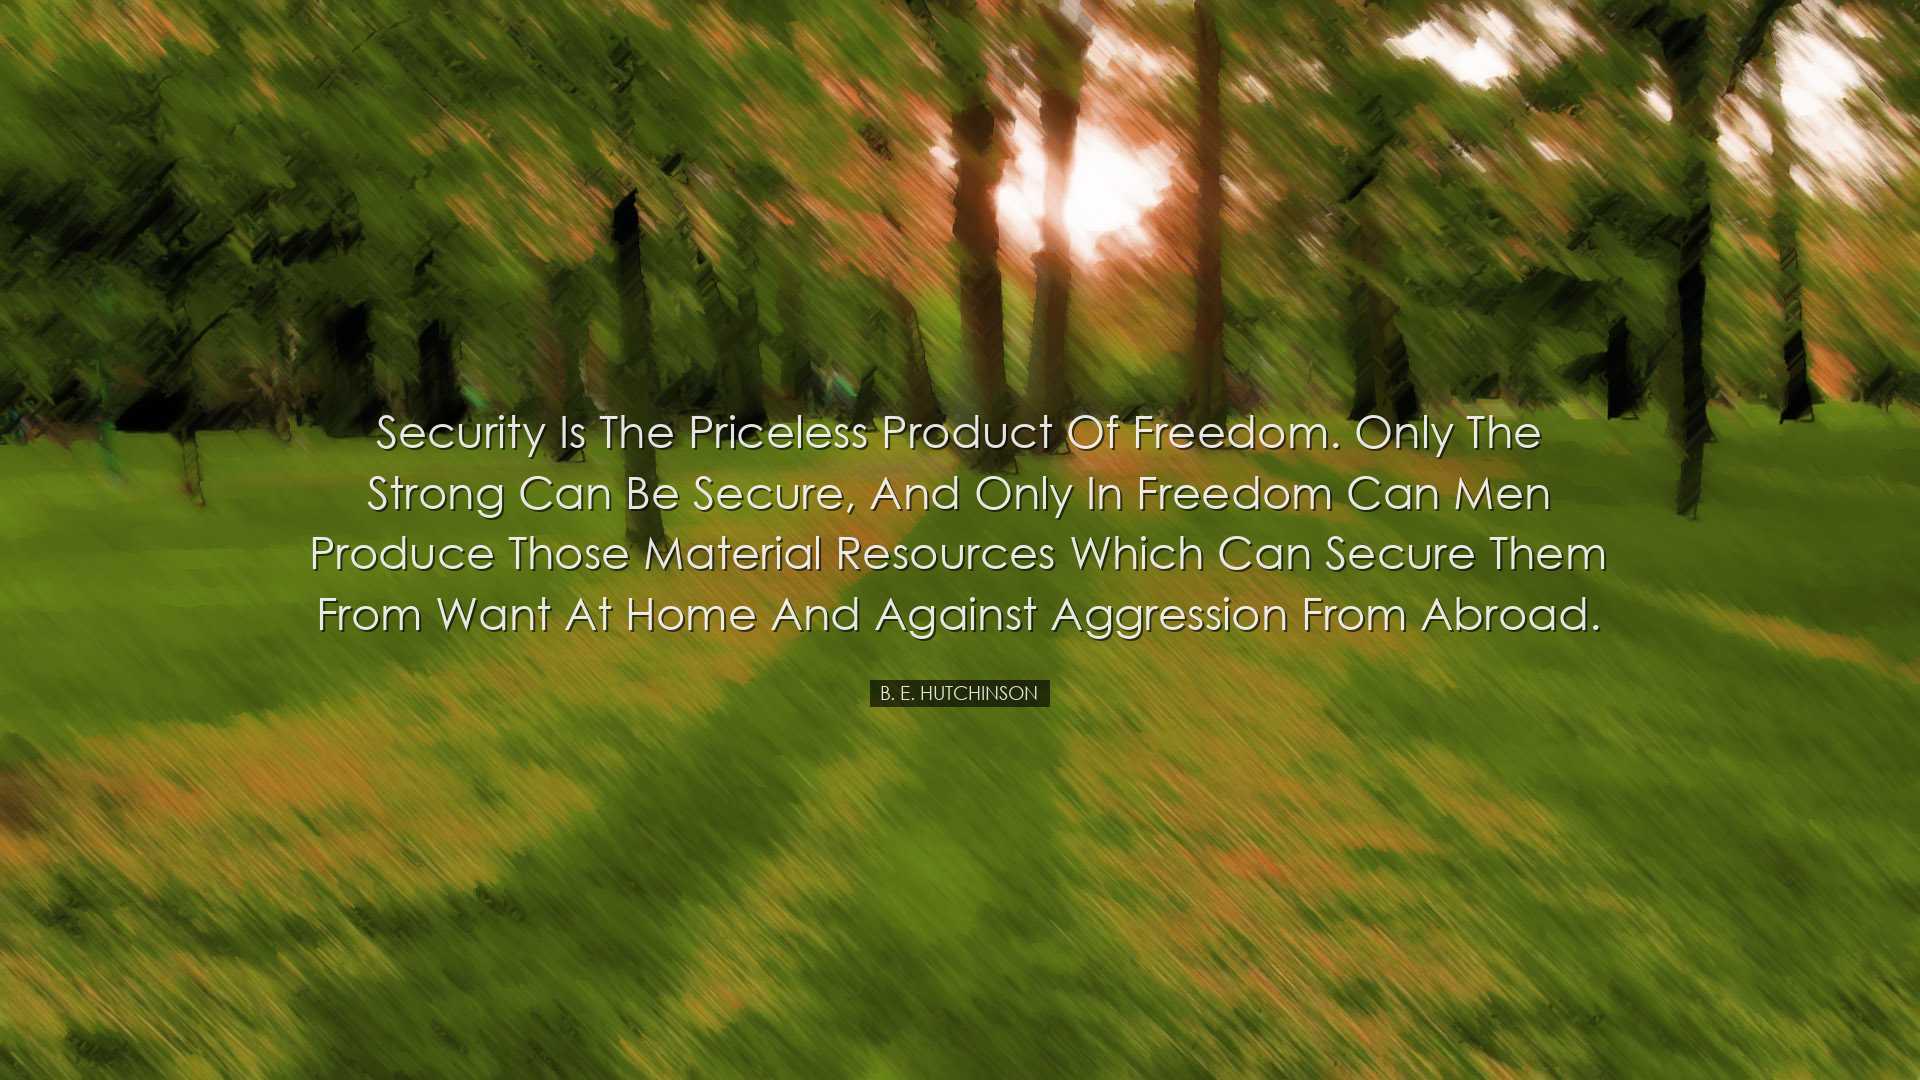 Security is the priceless product of freedom. Only the strong can